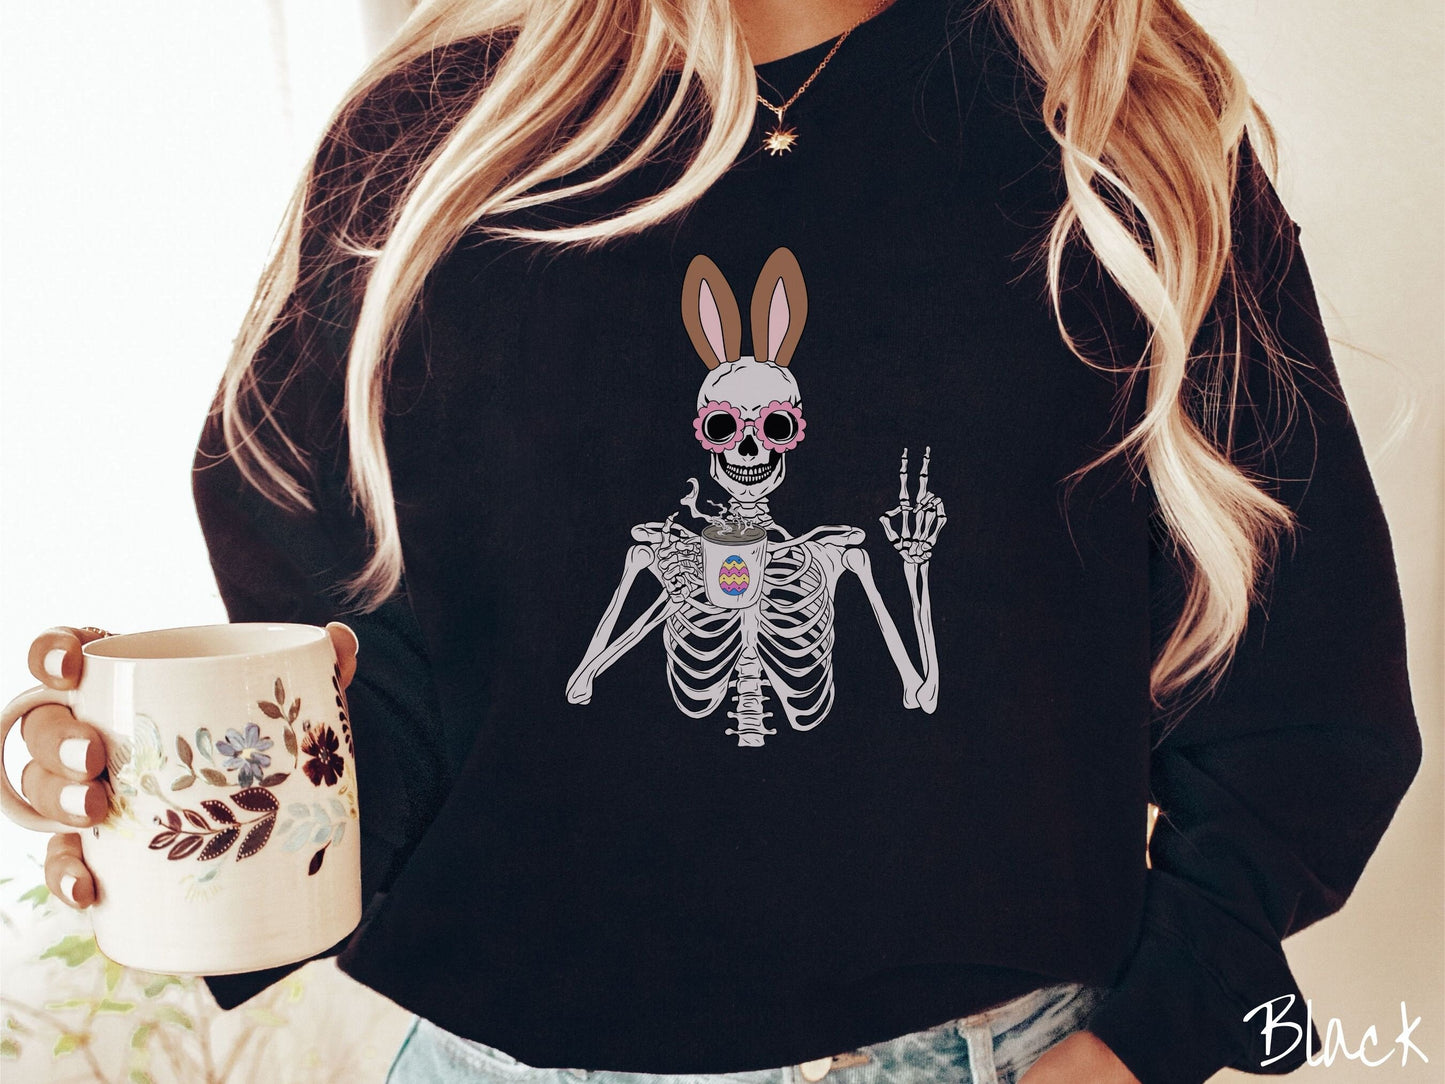 A woman wearing a cute, vintage black colored sweatshirt with a pink-toned skeleton wearing pink glasses and brown bunny ears, holding a cup of coffee and holding up a peace sign with the other hand. The white coffee cup has a colorful Easter egg.